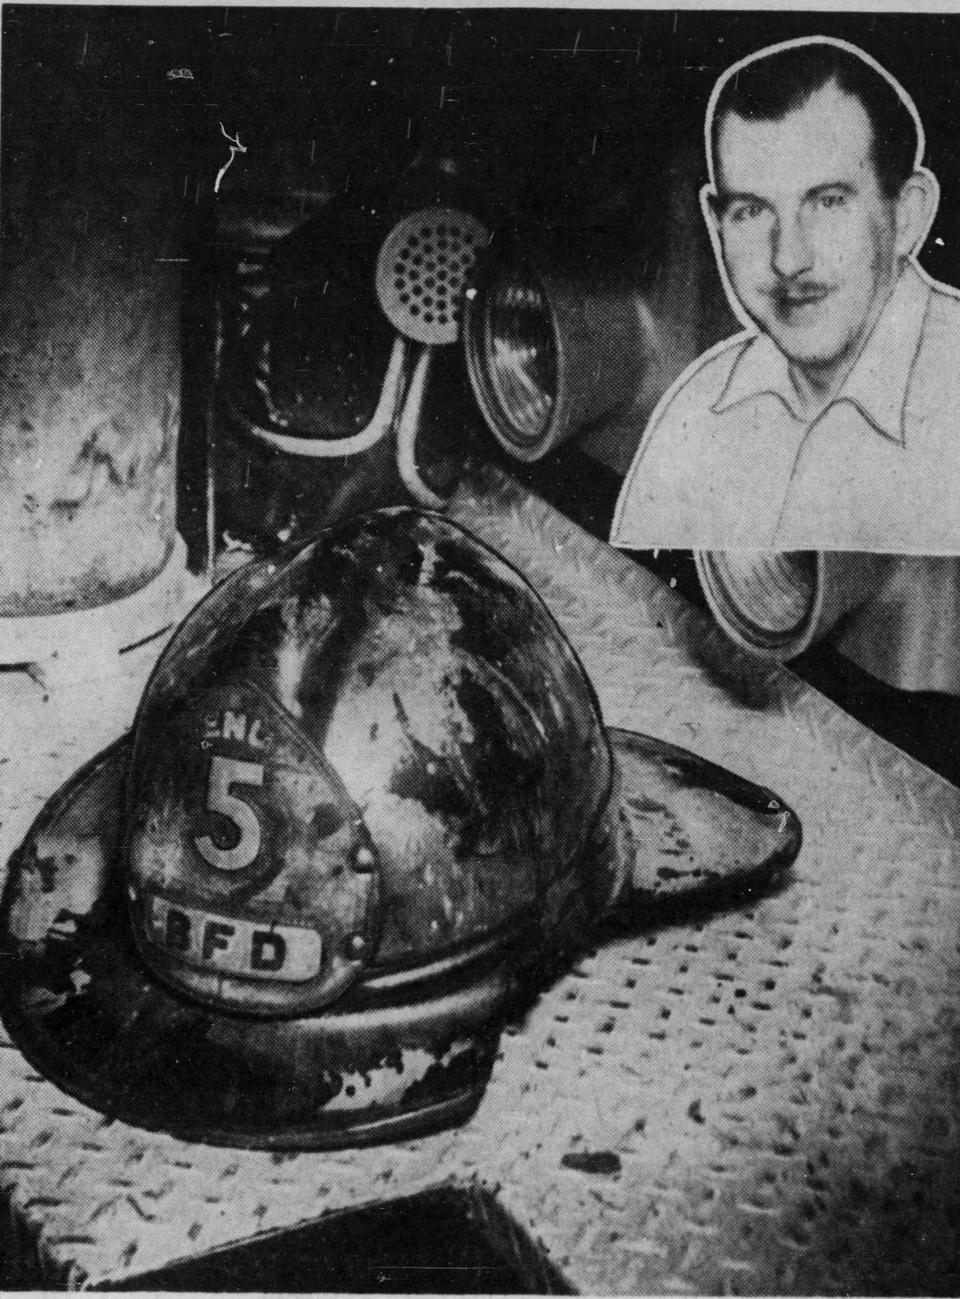 The image of Patrick Ryan and his helmet after the fire in 1951.